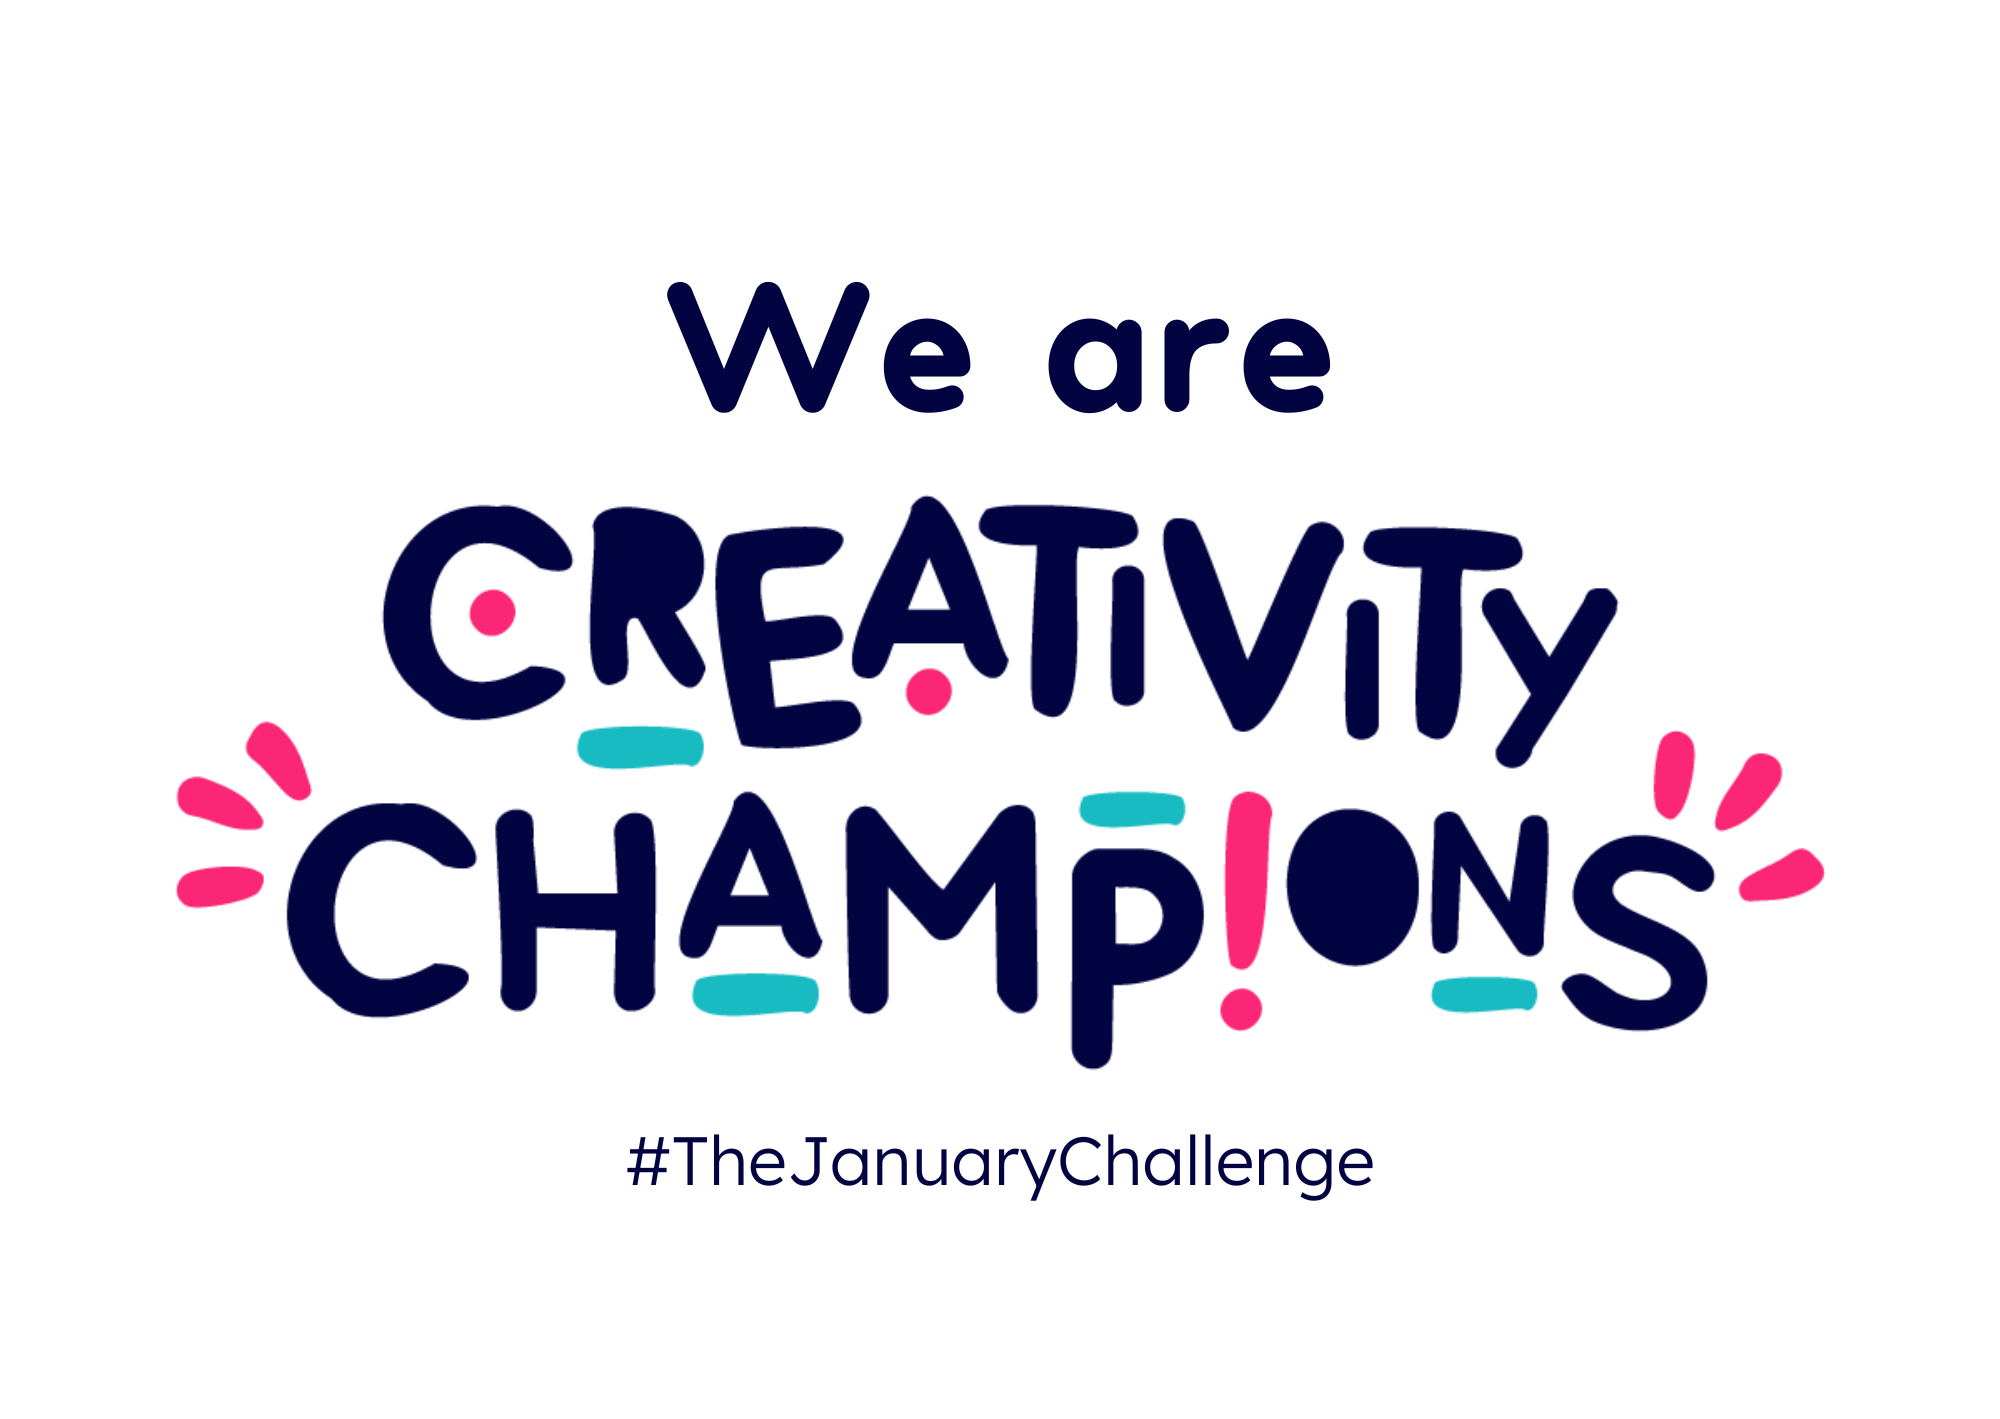 A poster that you can click and print that says 'We are Creativity Champions' #TheJanuaryChallenge